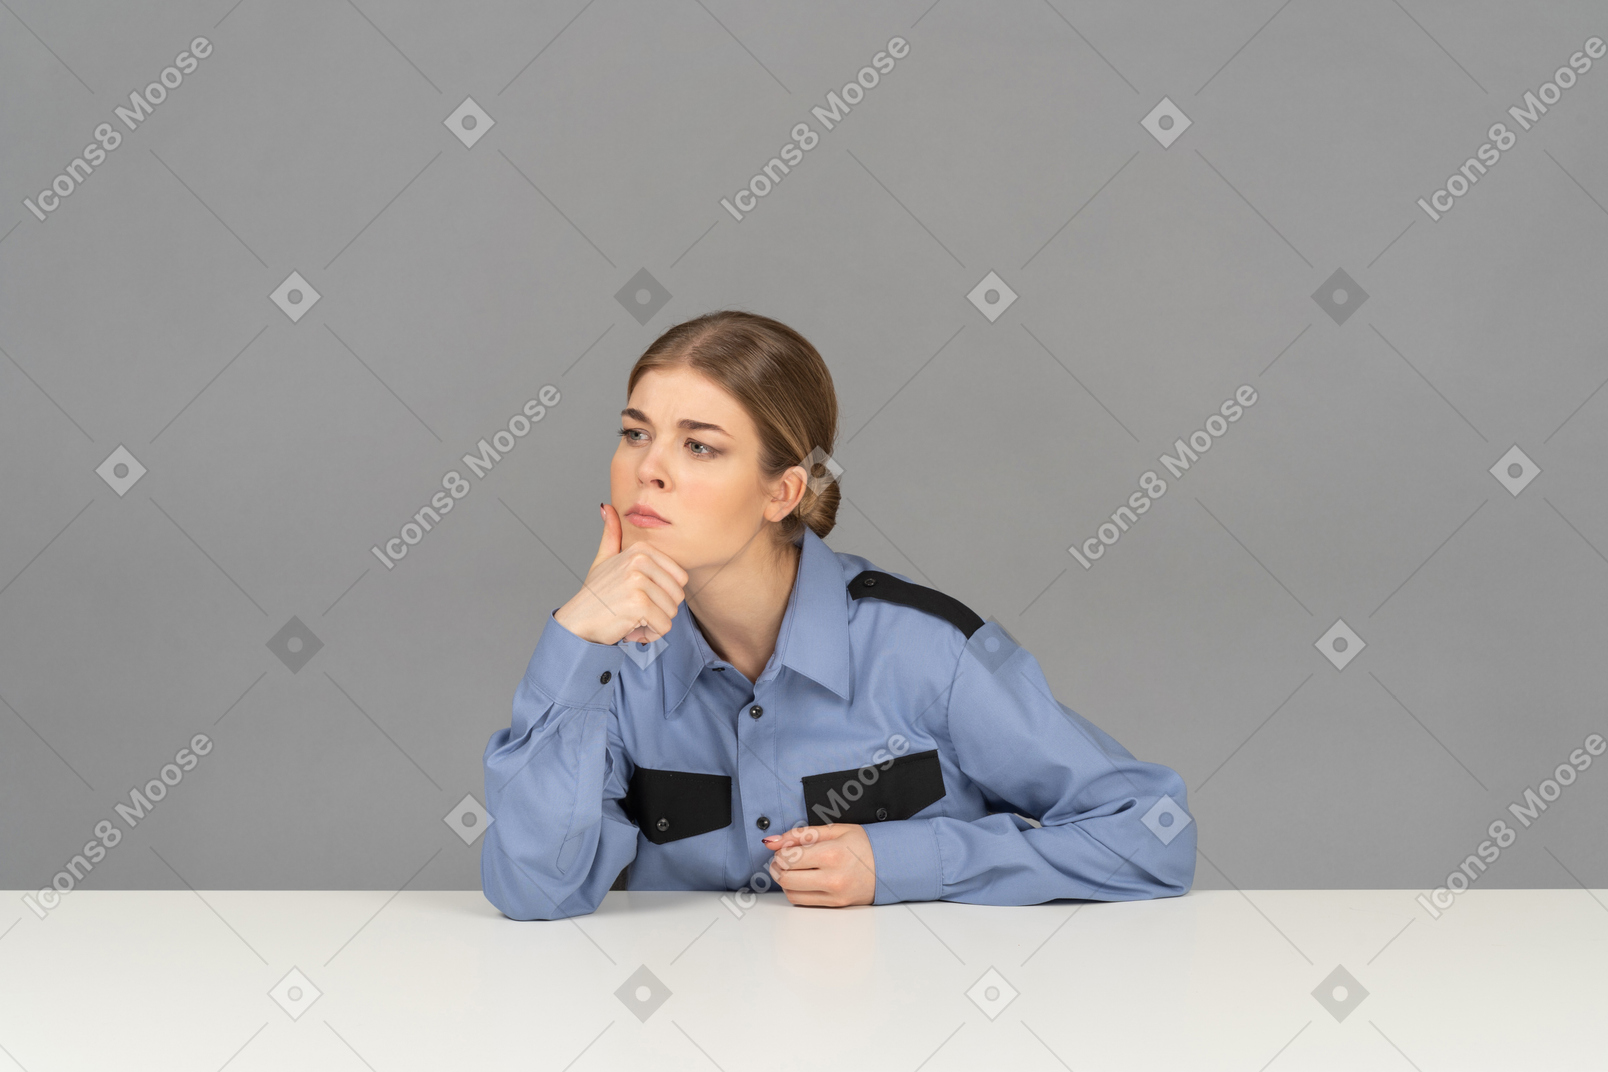 A thoughtful female security guard touching her chin